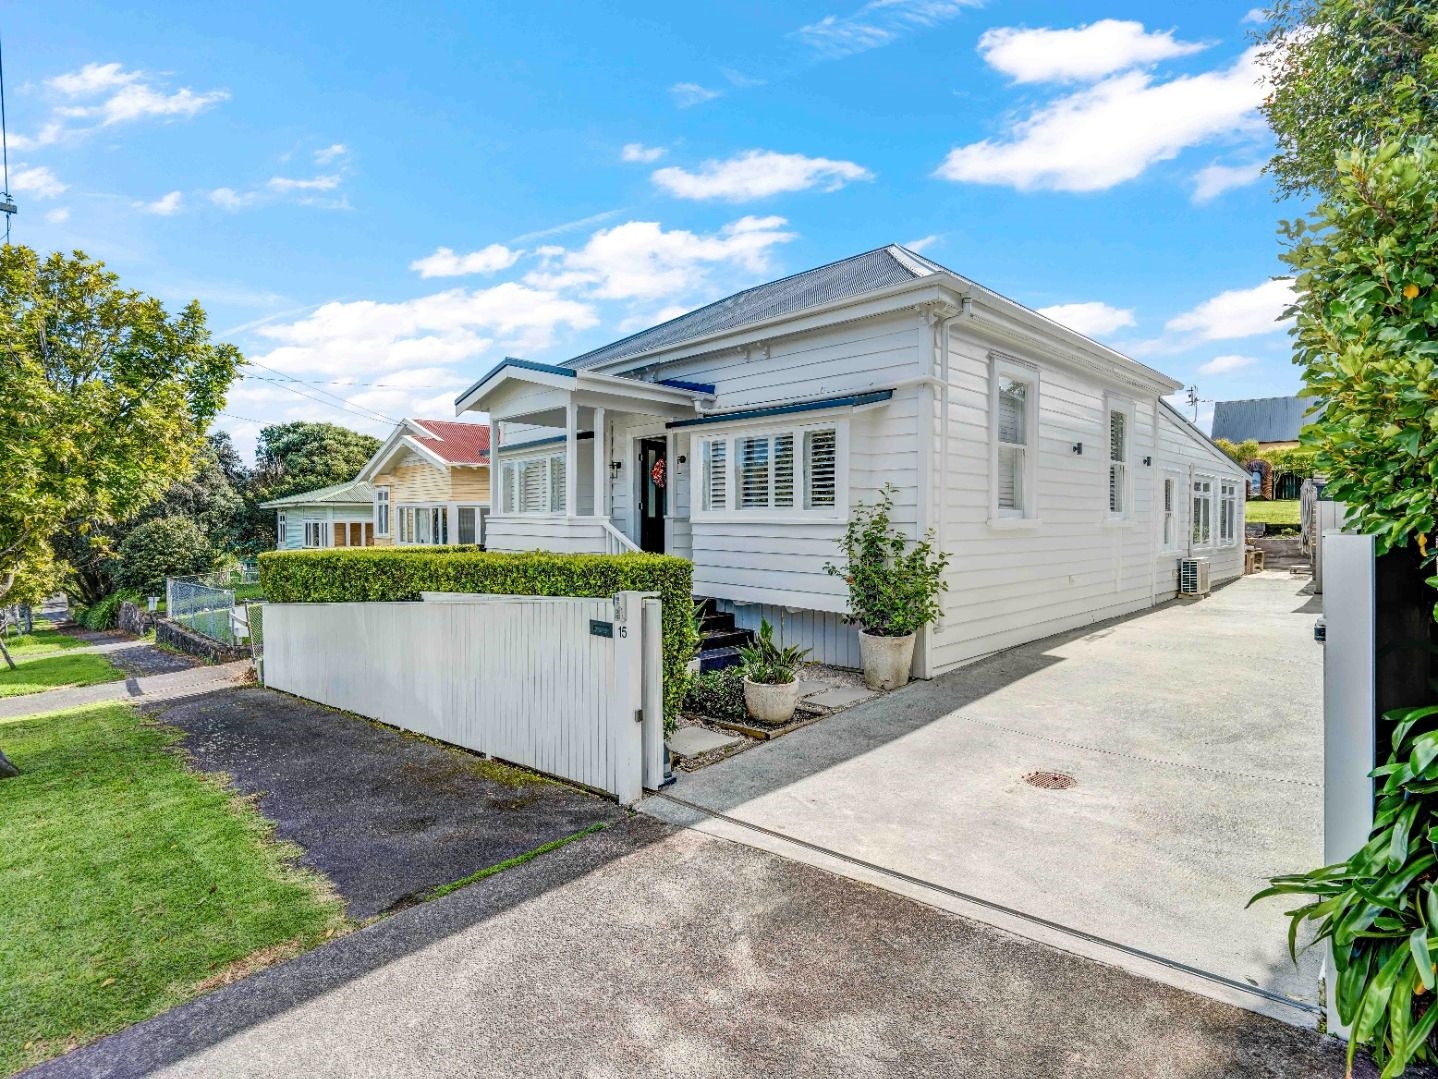 Real Estate For Rent Houses & Apartments : Short term in Grey Lynn.